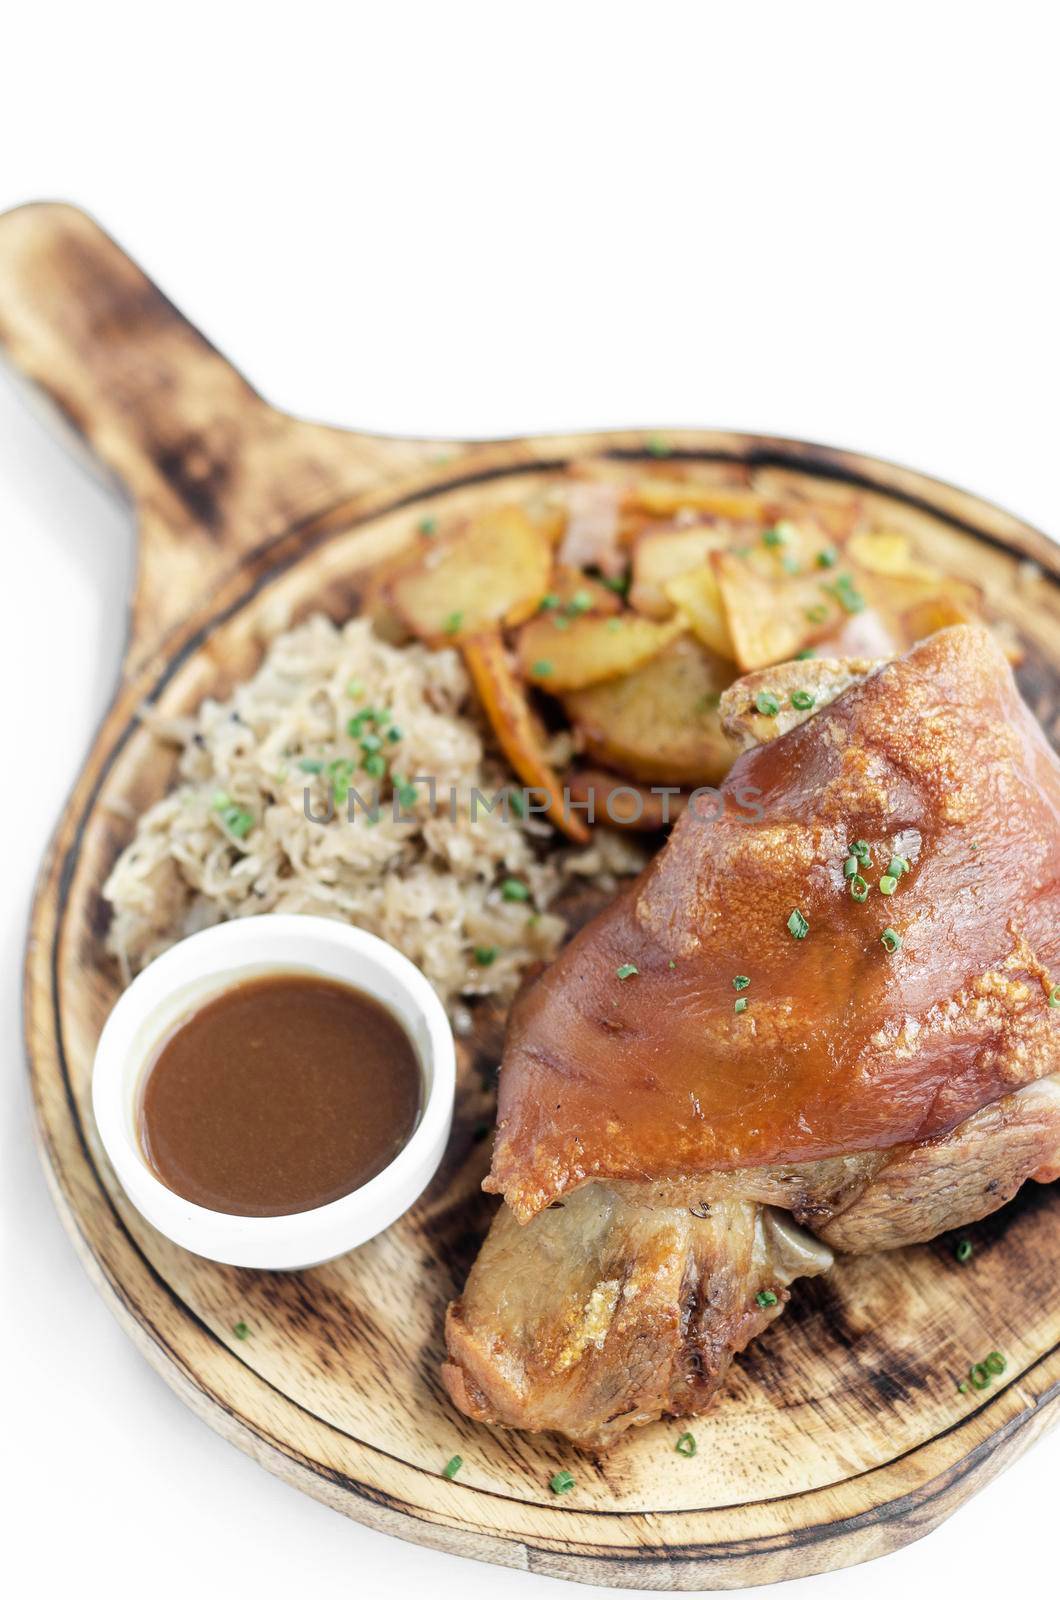 SCHWEINSHAXE traditional german pork knuckle with sauerkraut and potatoes meal on white background